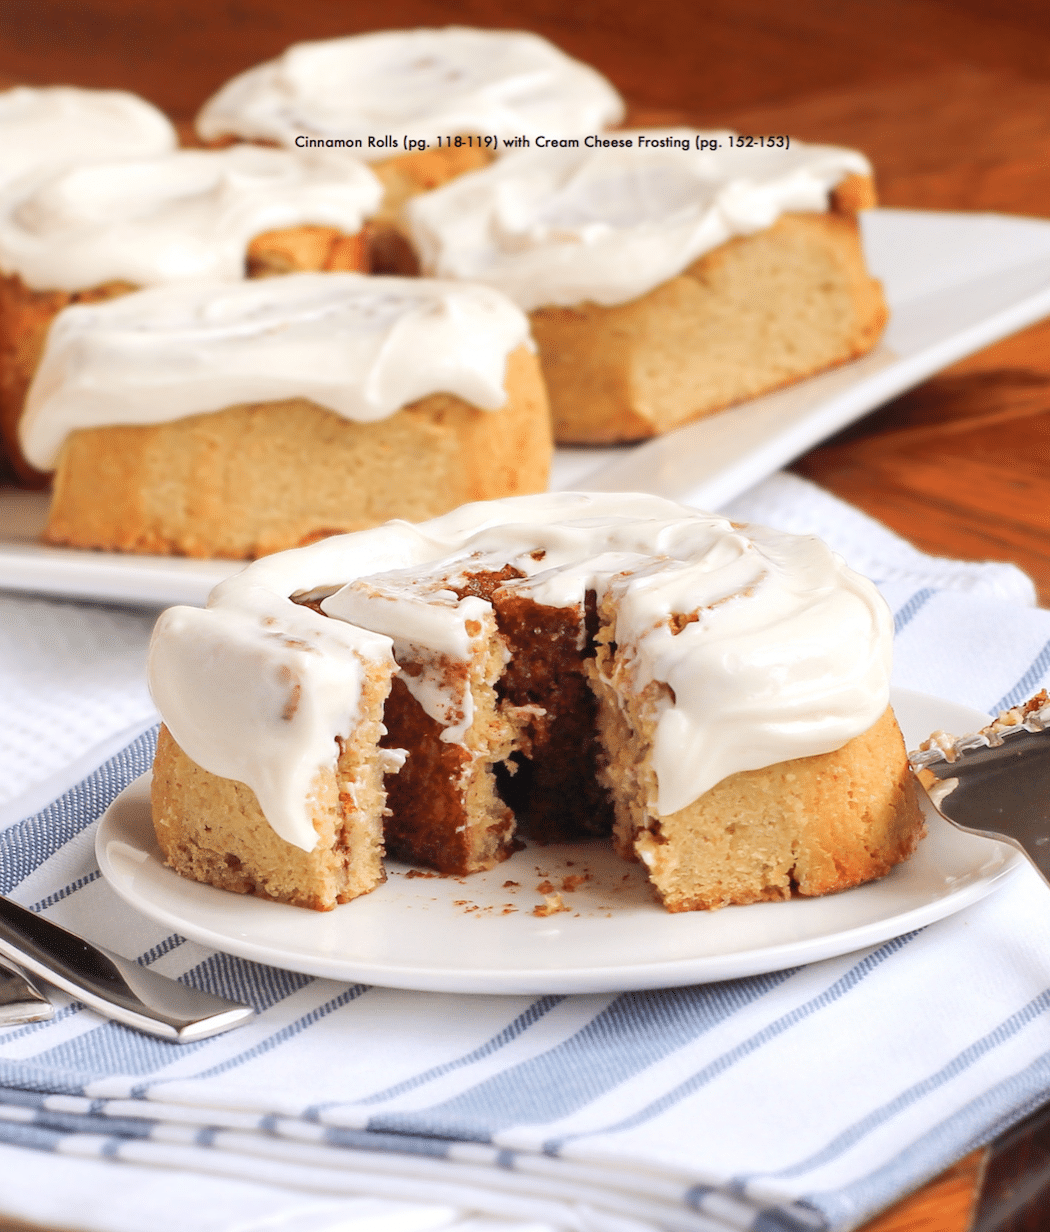 MAGIC -- that's what these Healthy Cinnamon Rolls are!  These pillowy treats are sweet, buttery and tender, you'd never know they're all natural, refined sugar free, low carb, reduced fat, high fiber, high protein and gluten free! These gluten free cinnamon rolls are one helluva baking miracle.